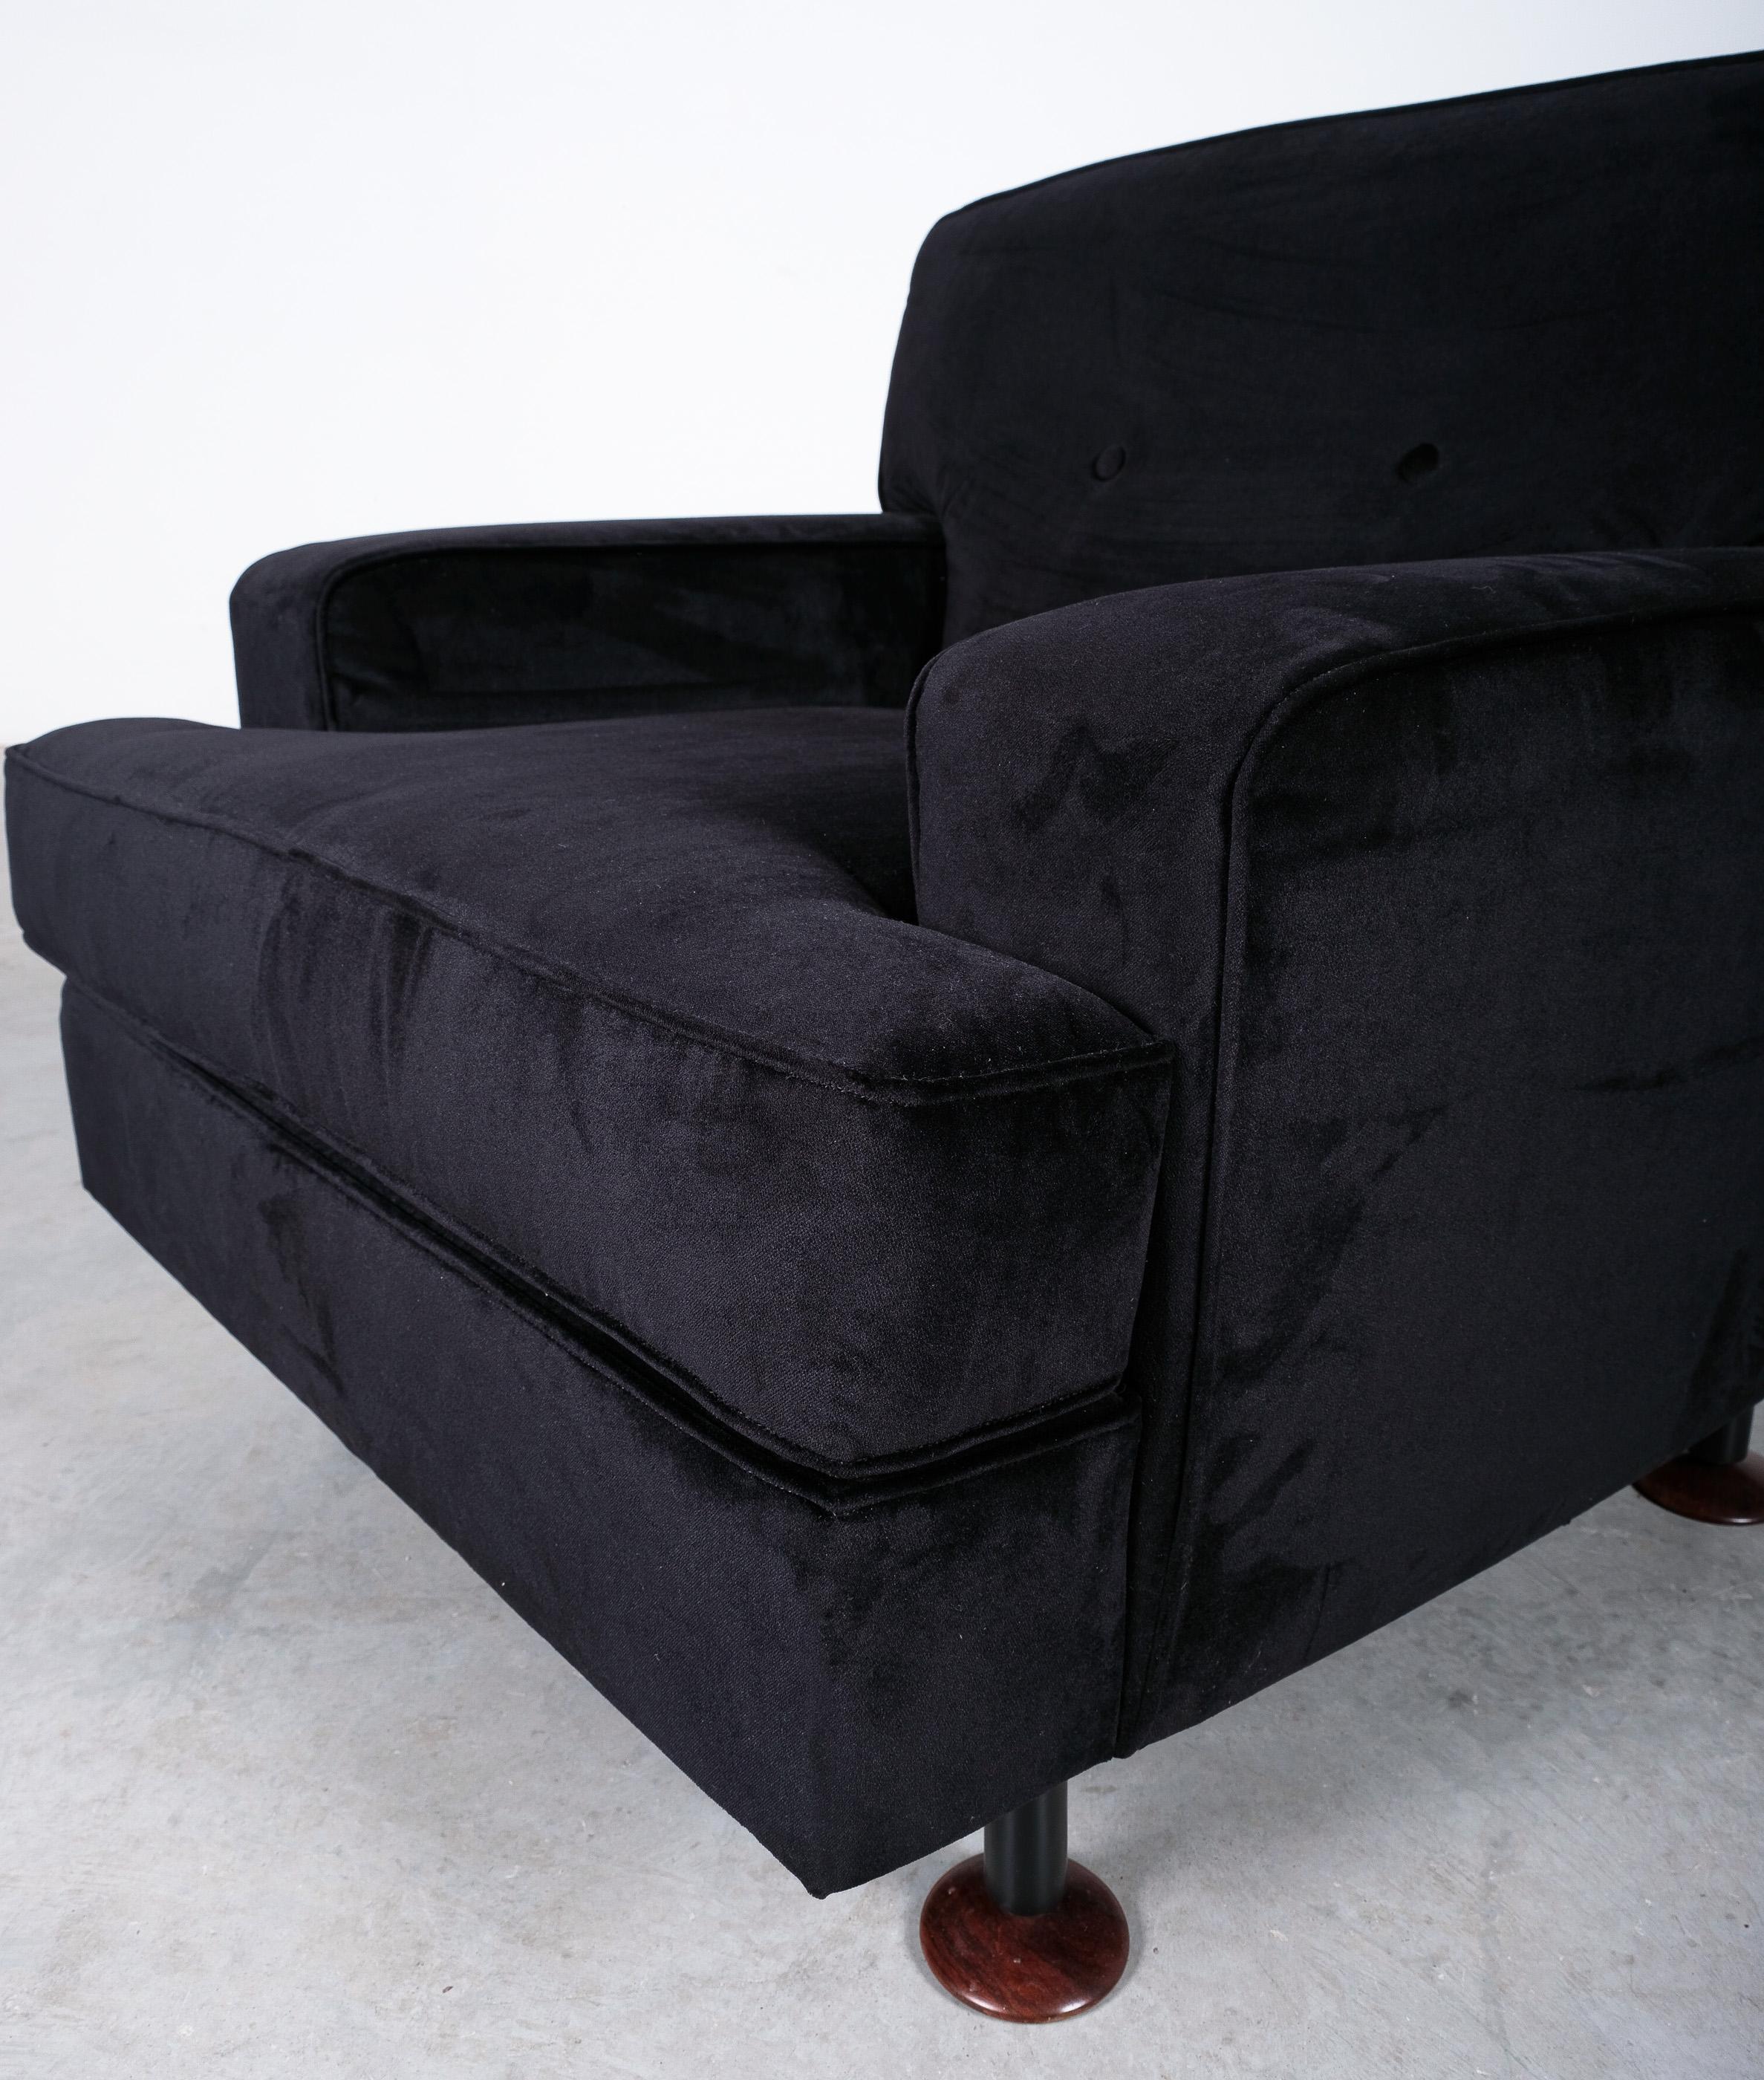 Marco Zanuso 'Square' Black Velvet Chairs with Teak Feet, Italy, circa 1955 For Sale 6